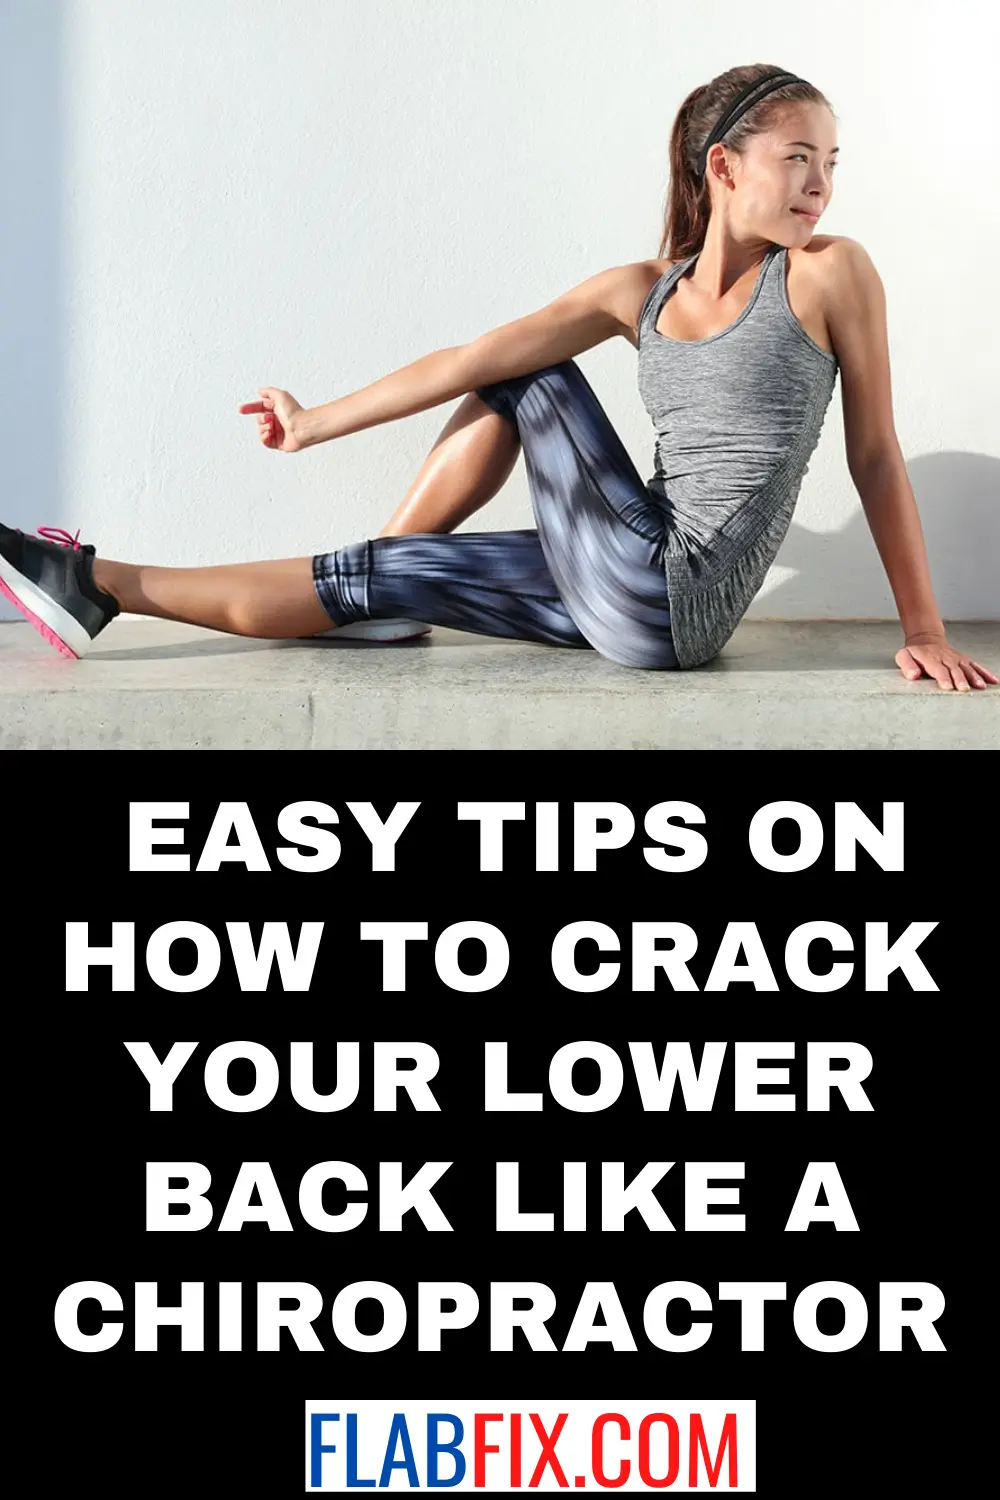 10 Easy Tips on How to Crack Your Lower Back like a ...